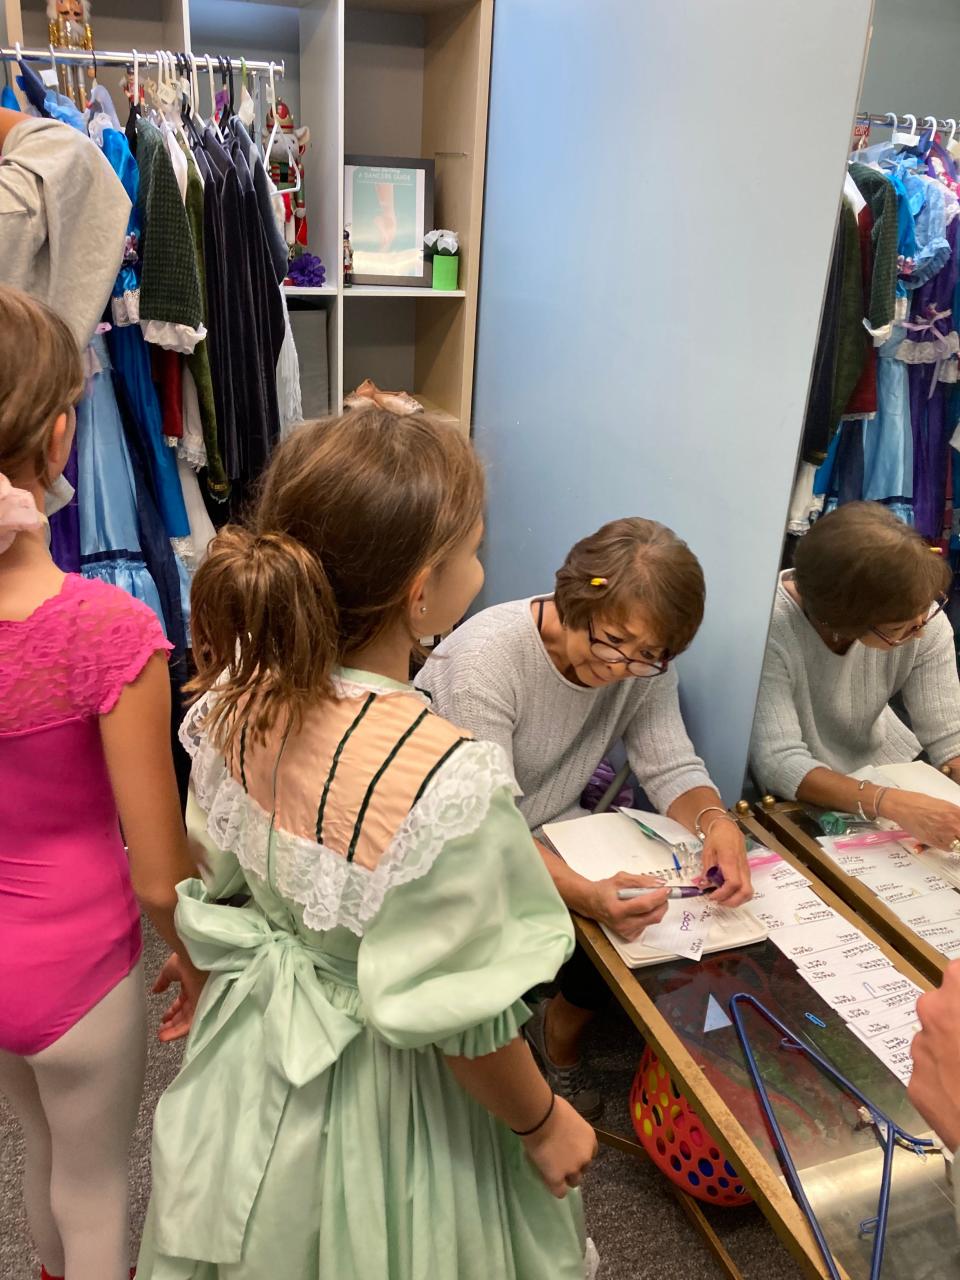 Karen Hostler takes meticulous notes and spends hours on alterations ensuring that every dancer looks the part for the holiday shows. Oct. 8, 2023.